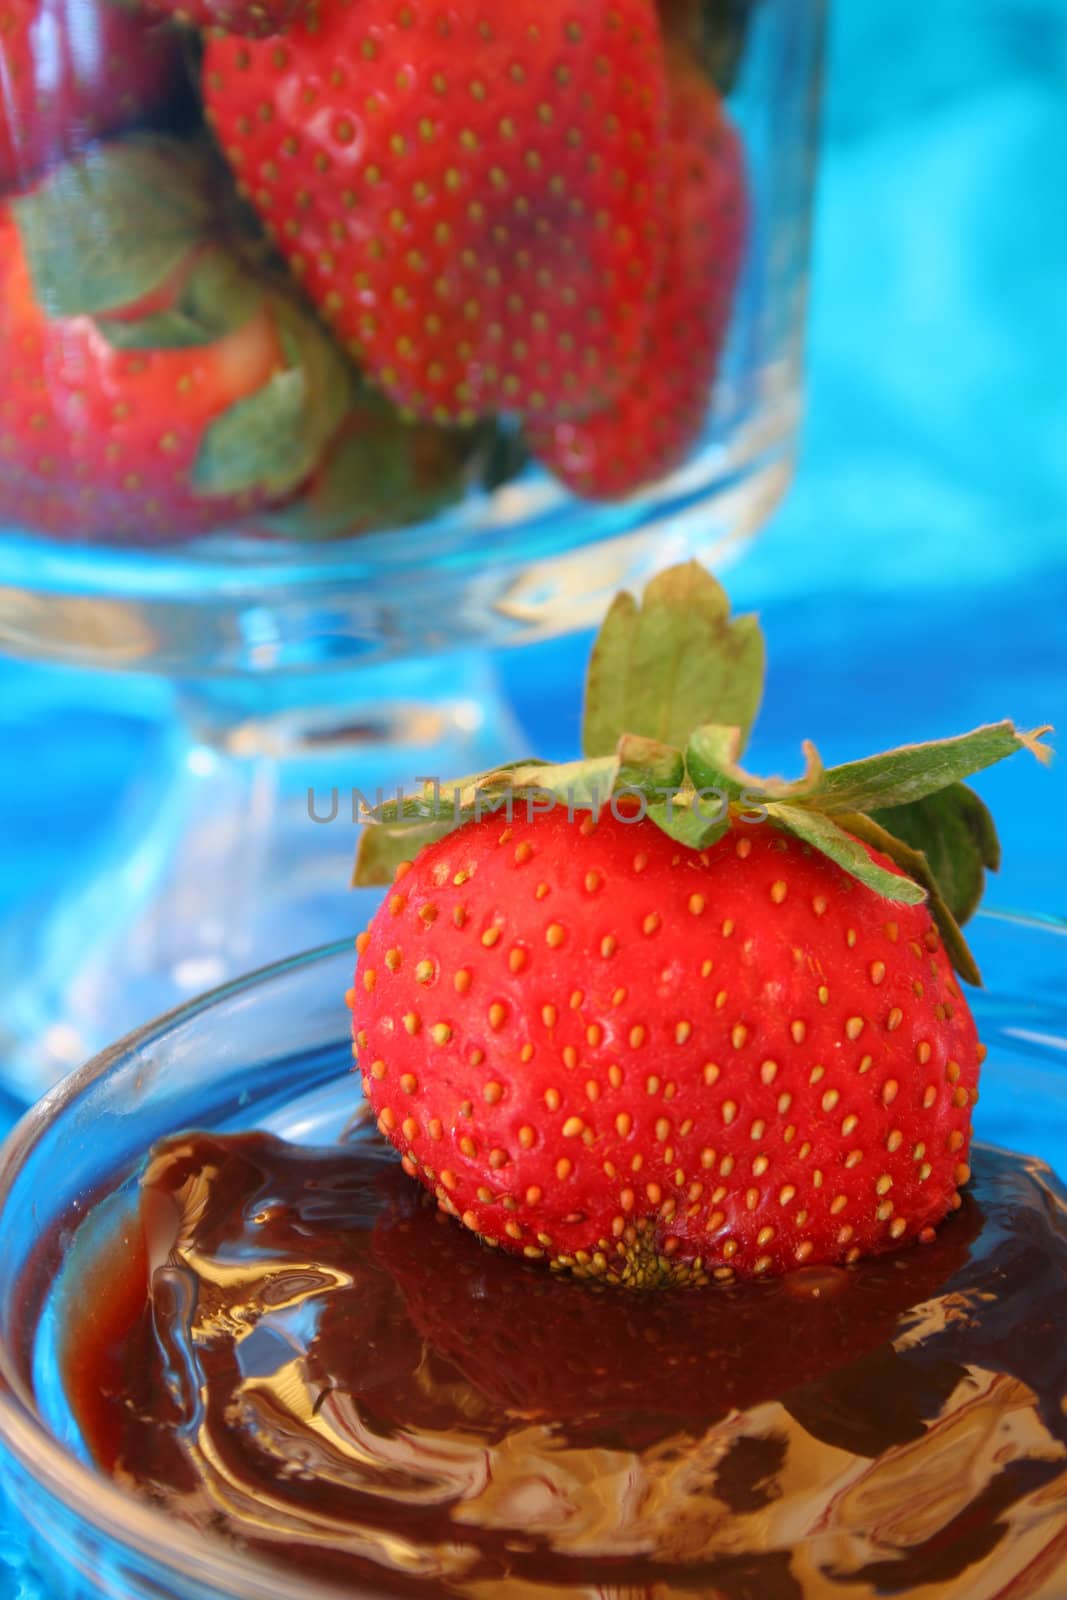 Chocolate and Strawberries by thephotoguy